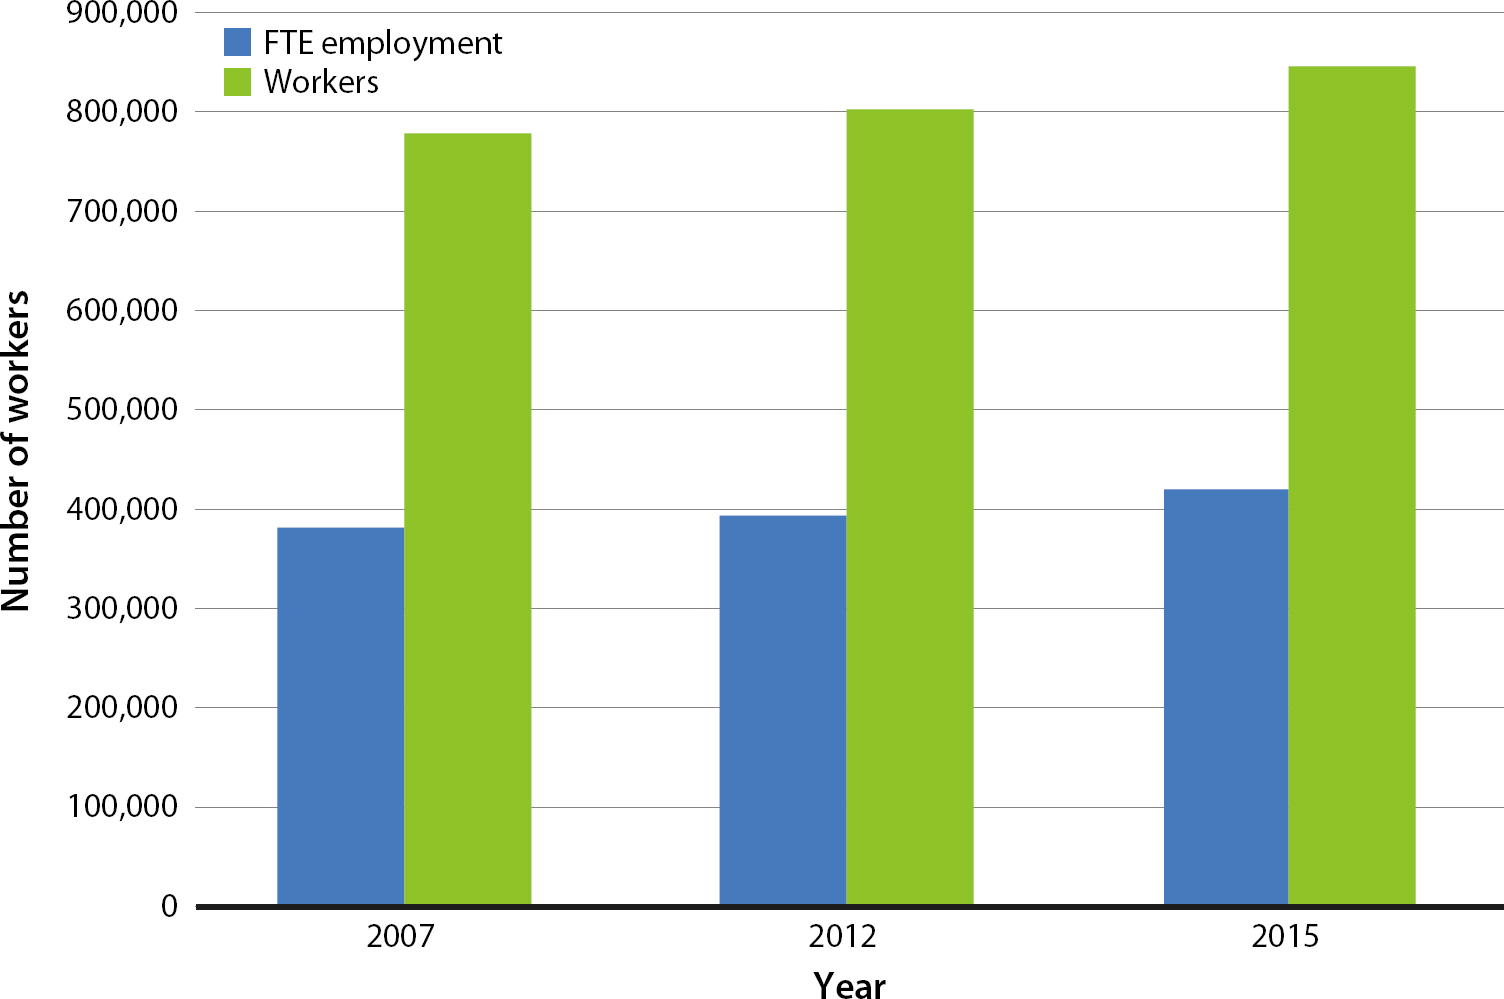 Average FTE employment and unique farmworkers: 2007, 2012 and 2015.